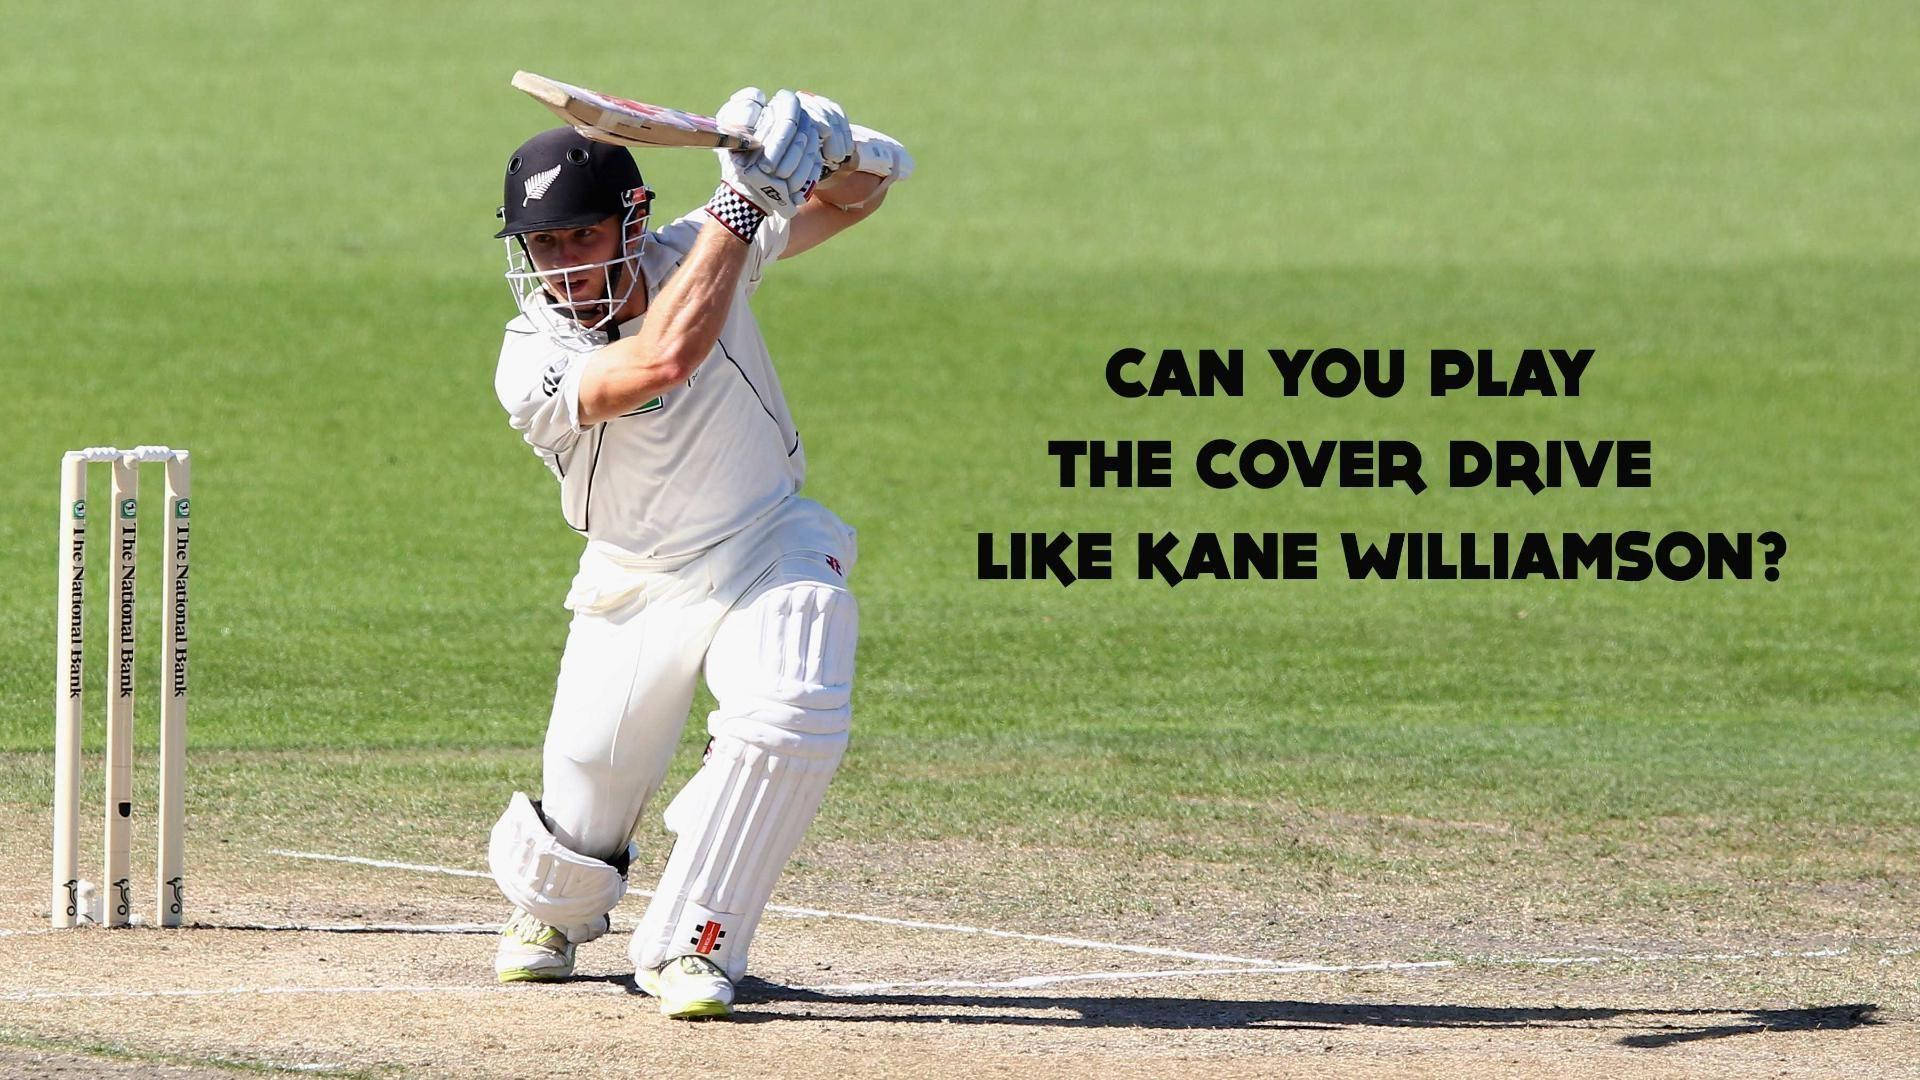 Kane Williamson Cover Drive Background